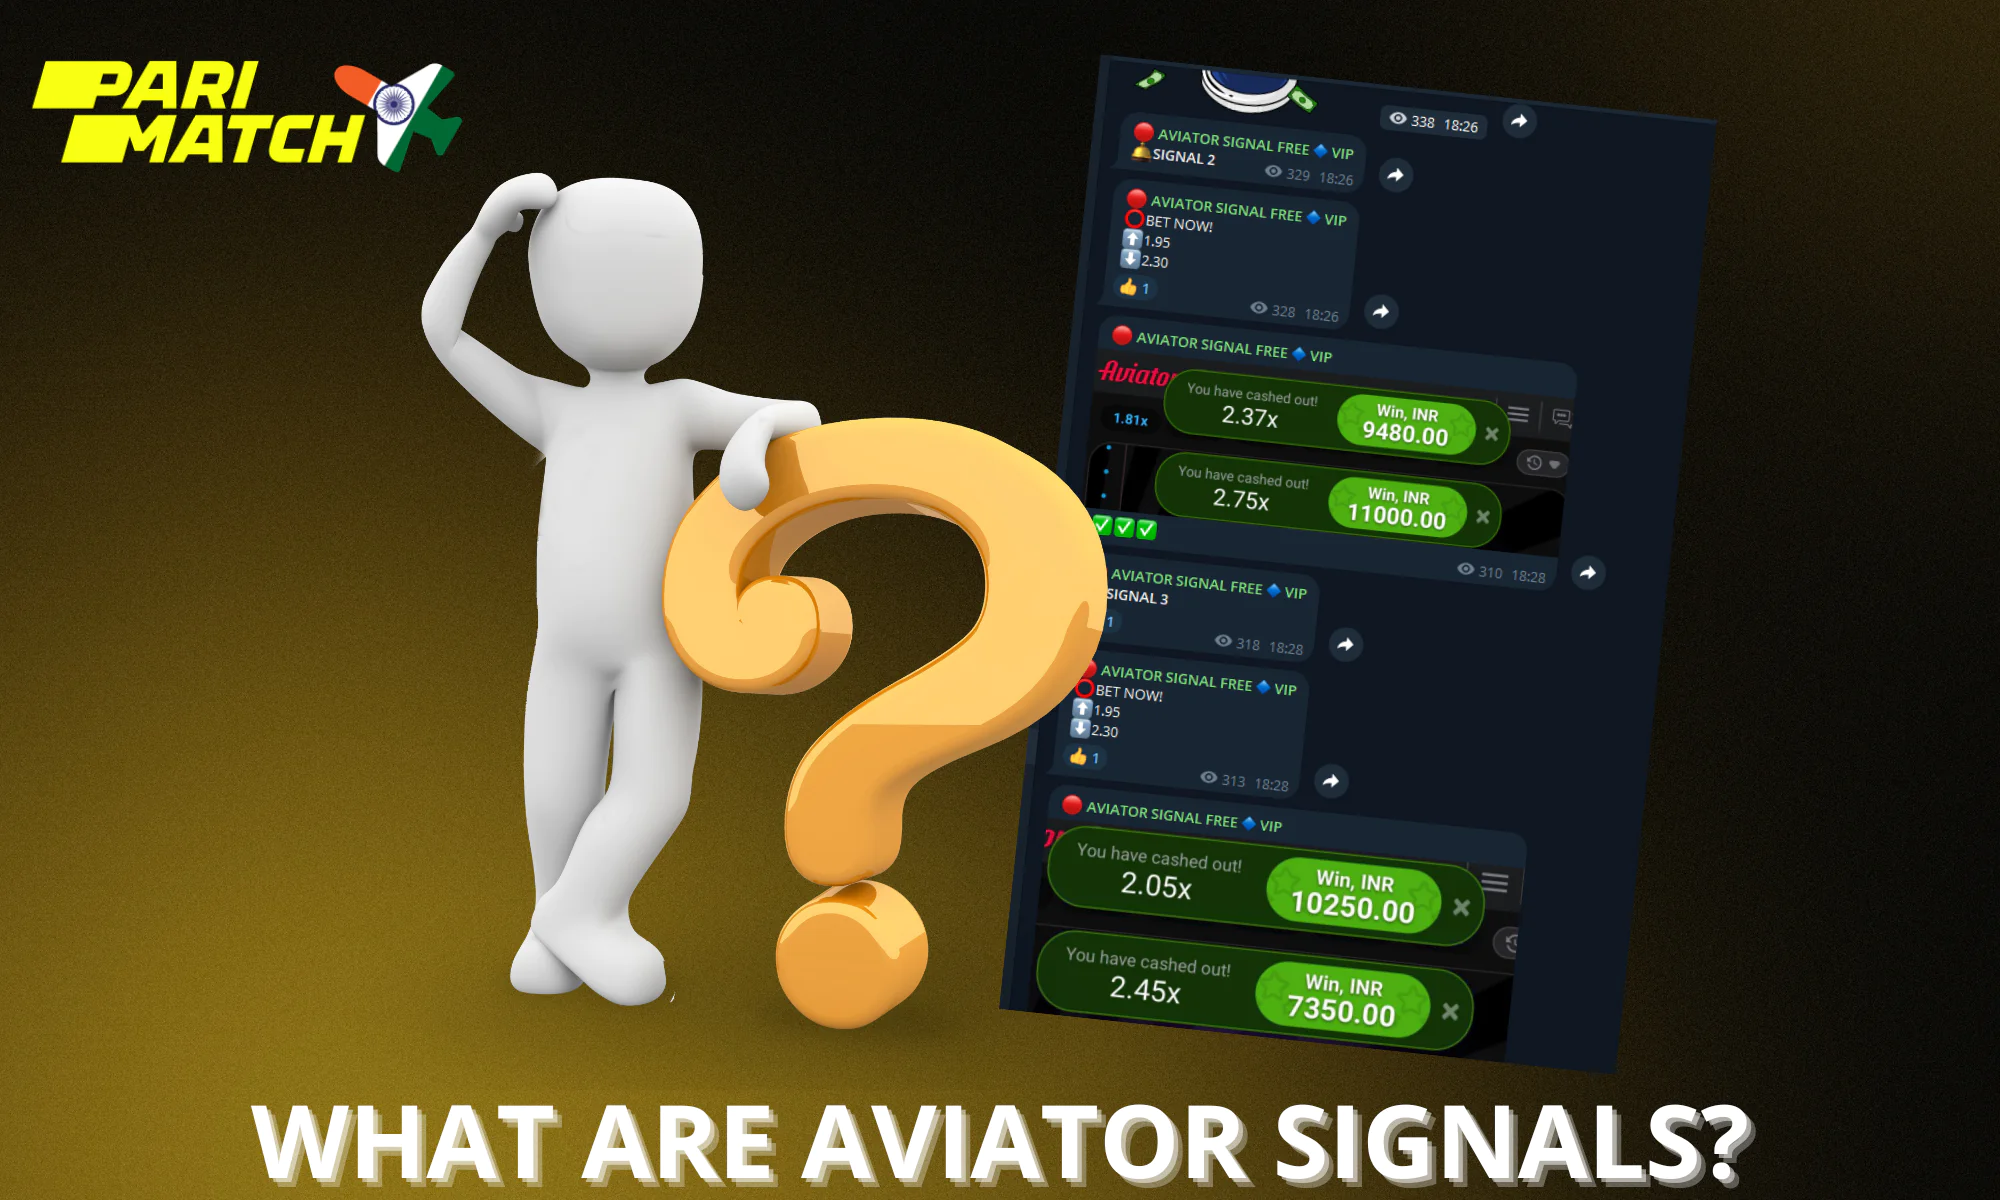 Parimatch Aviator signals are messages containing a predicted multiplier for the upcoming round